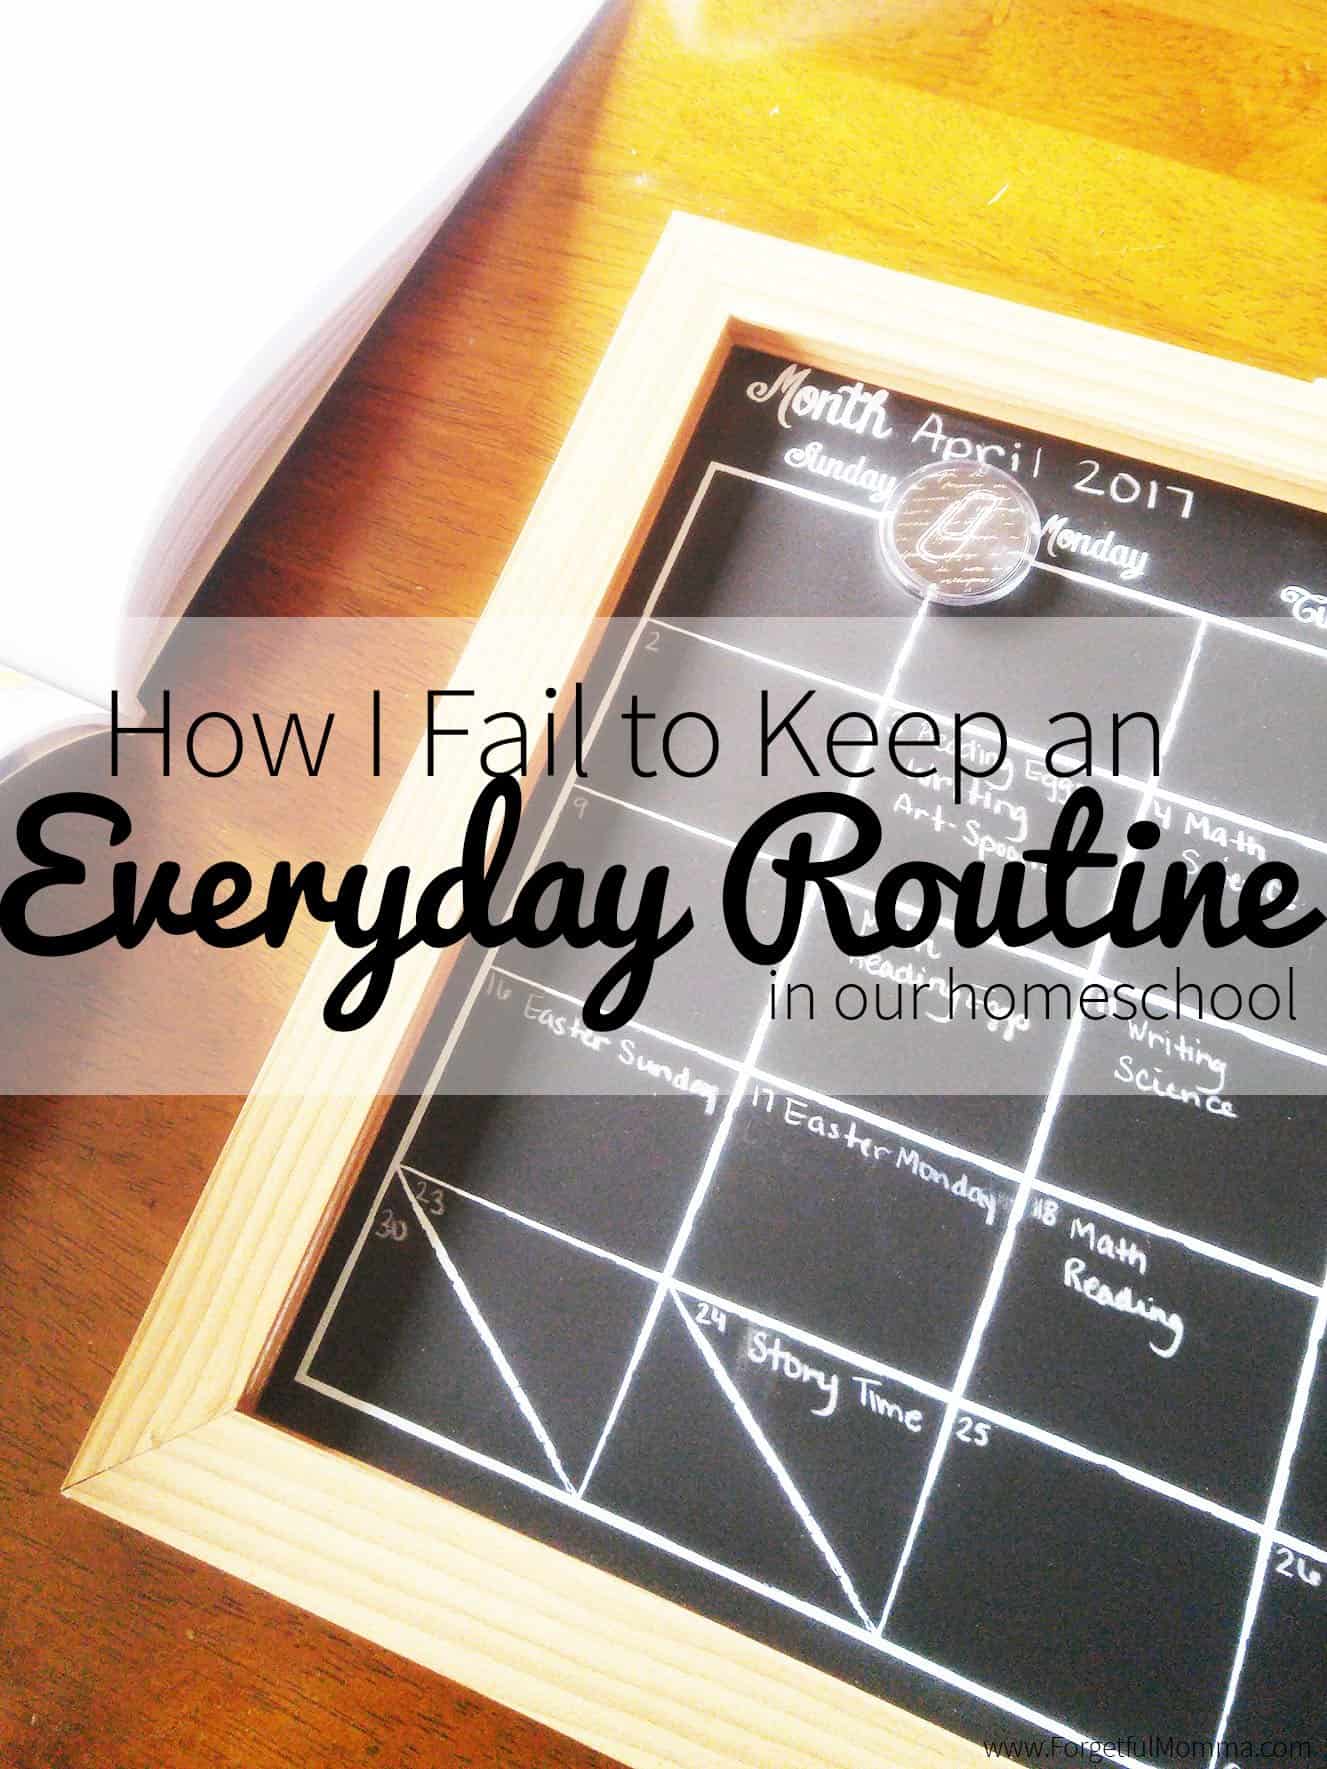 How I Fail to Keep an Everyday Routine